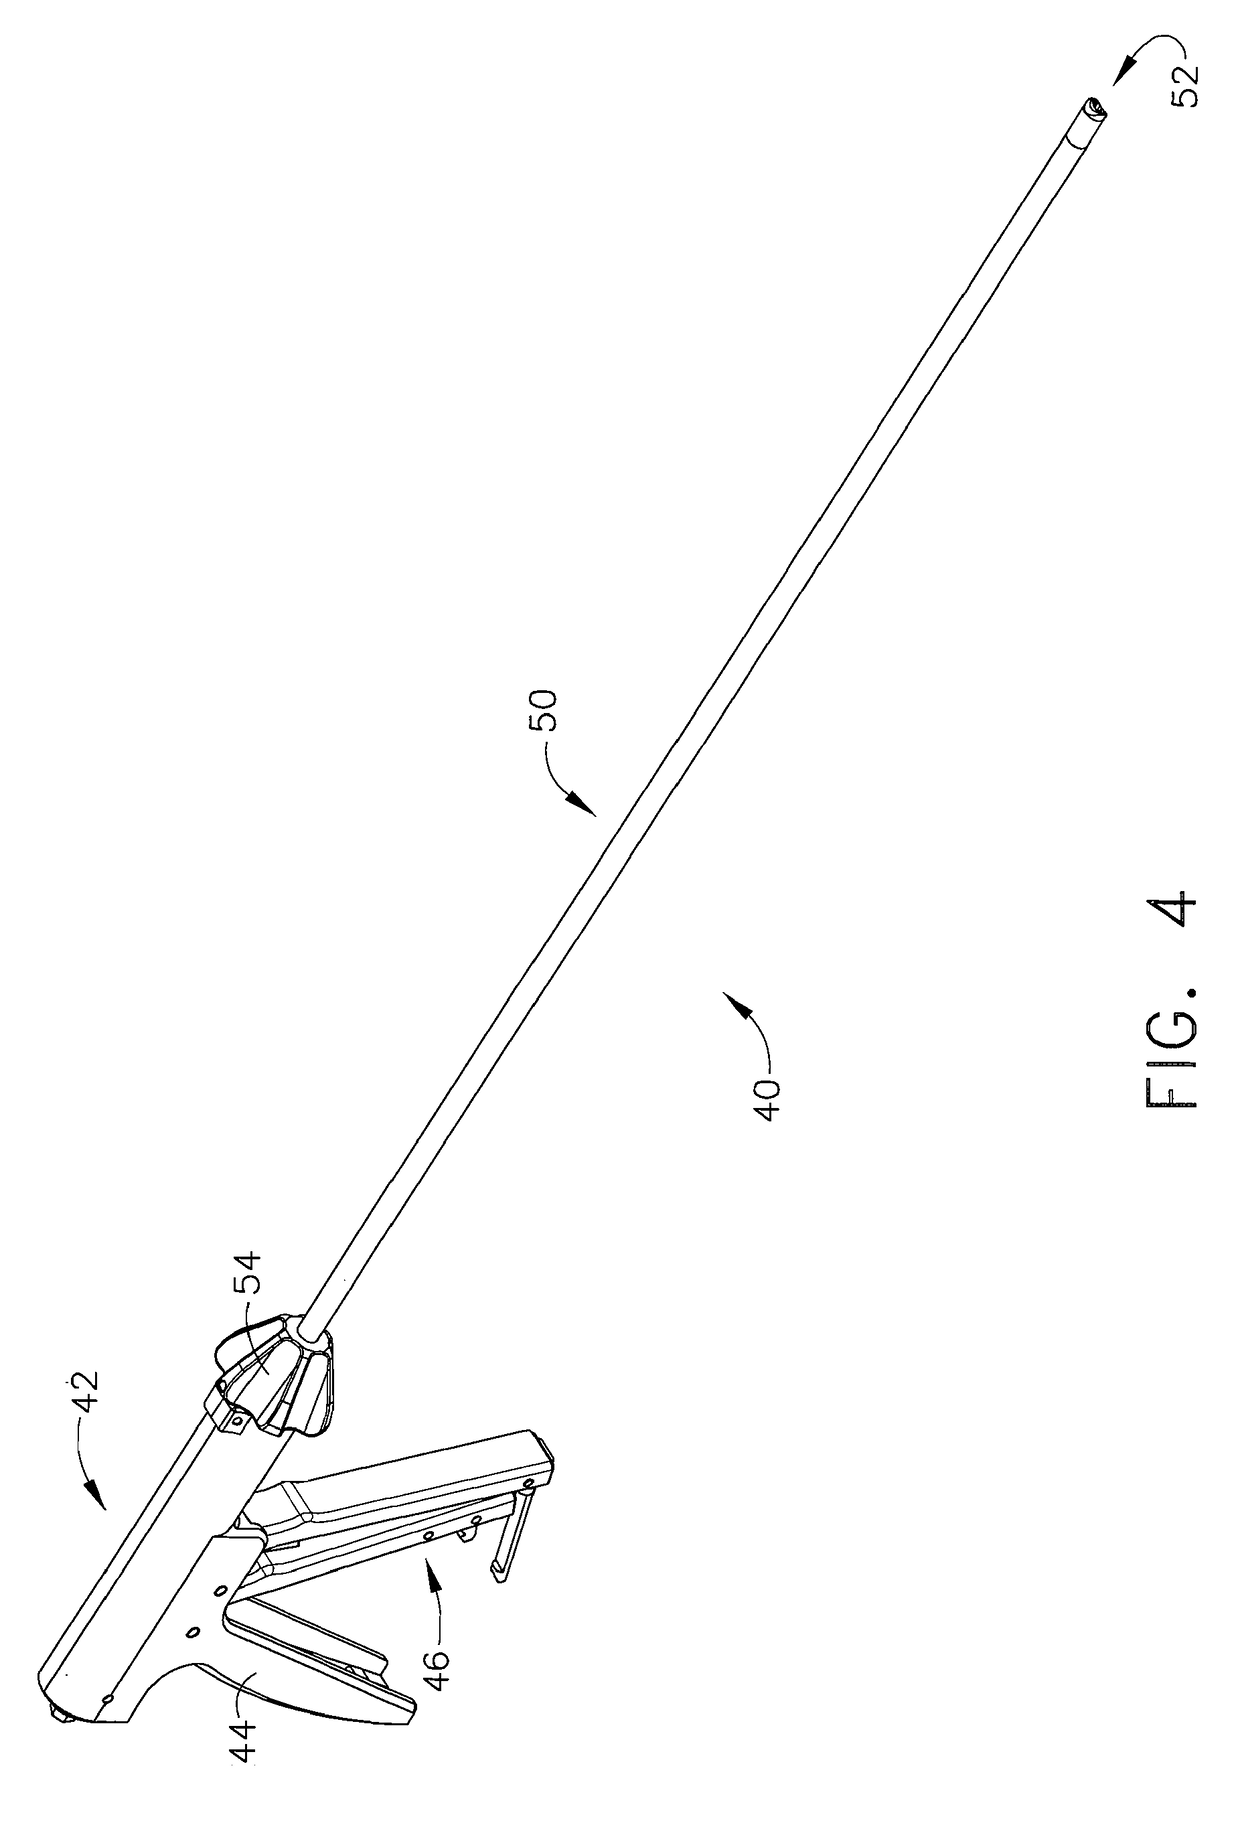 Surgical stapler for applying a large staple through a small delivery port and a method of using the stapler to secure a tissue fold